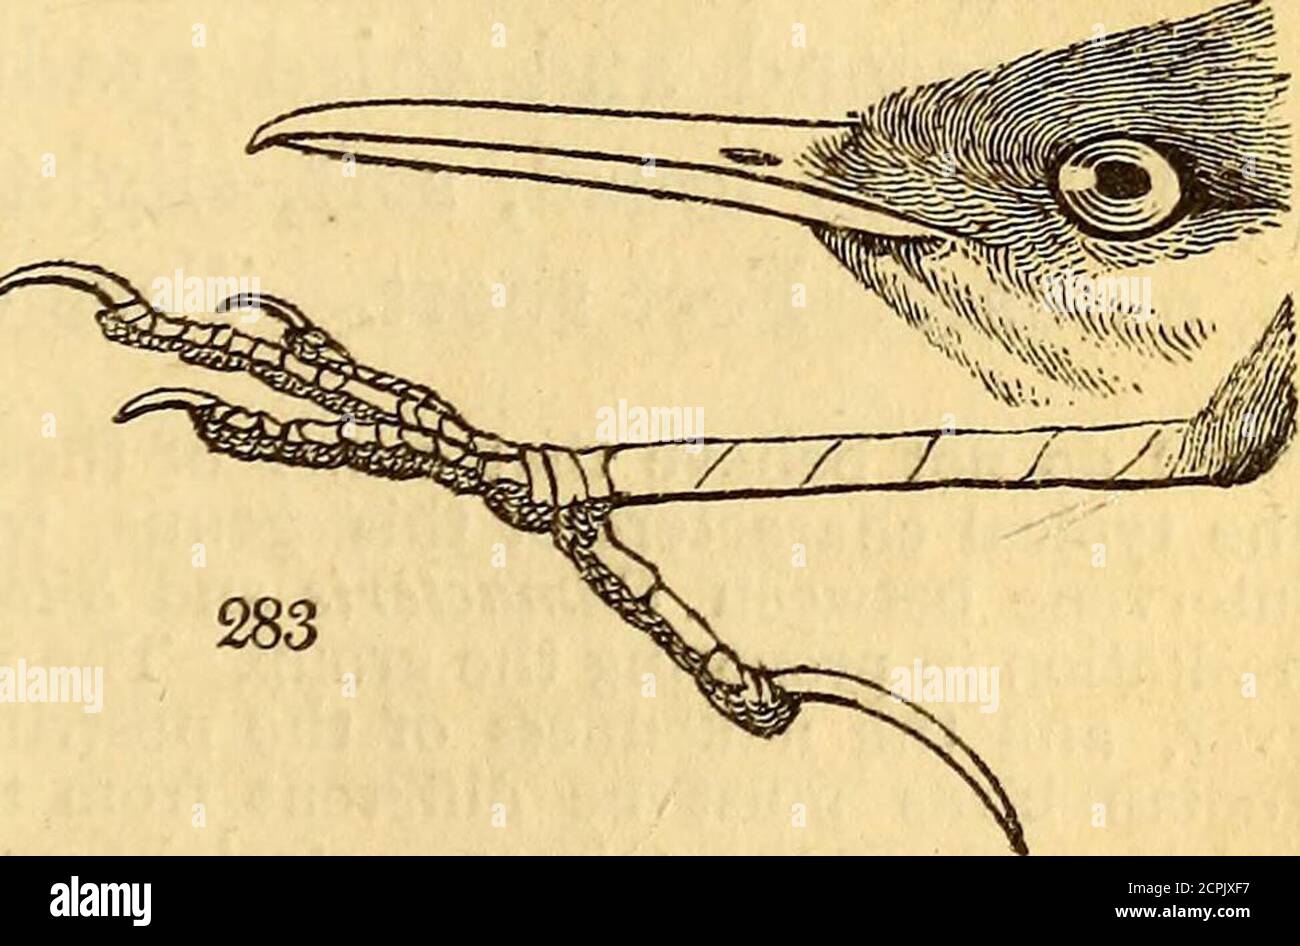 . On the natural history and classification of birds . than the tarsus; lateral toes unequal, the innershortest, and both slightly connected at their base ;hinder toe shorter than the middle; its claw shorterthan the toe. The flssirostral type. Z. genibarbis. Zool. 111. i. pi. 100. Subfam. SITTINGS. Nuthatches.Bill very straight, more or less cylindrical. Wingslong, pointed; the first quill hardly shorter than thesecond. Tail very short. Hind toe as long as themiddle. The flssirostral division. Sittella, Sw. Bill very straight; the gonys curvingupwards ; the sides greatly compressed: tip of th Stock Photo